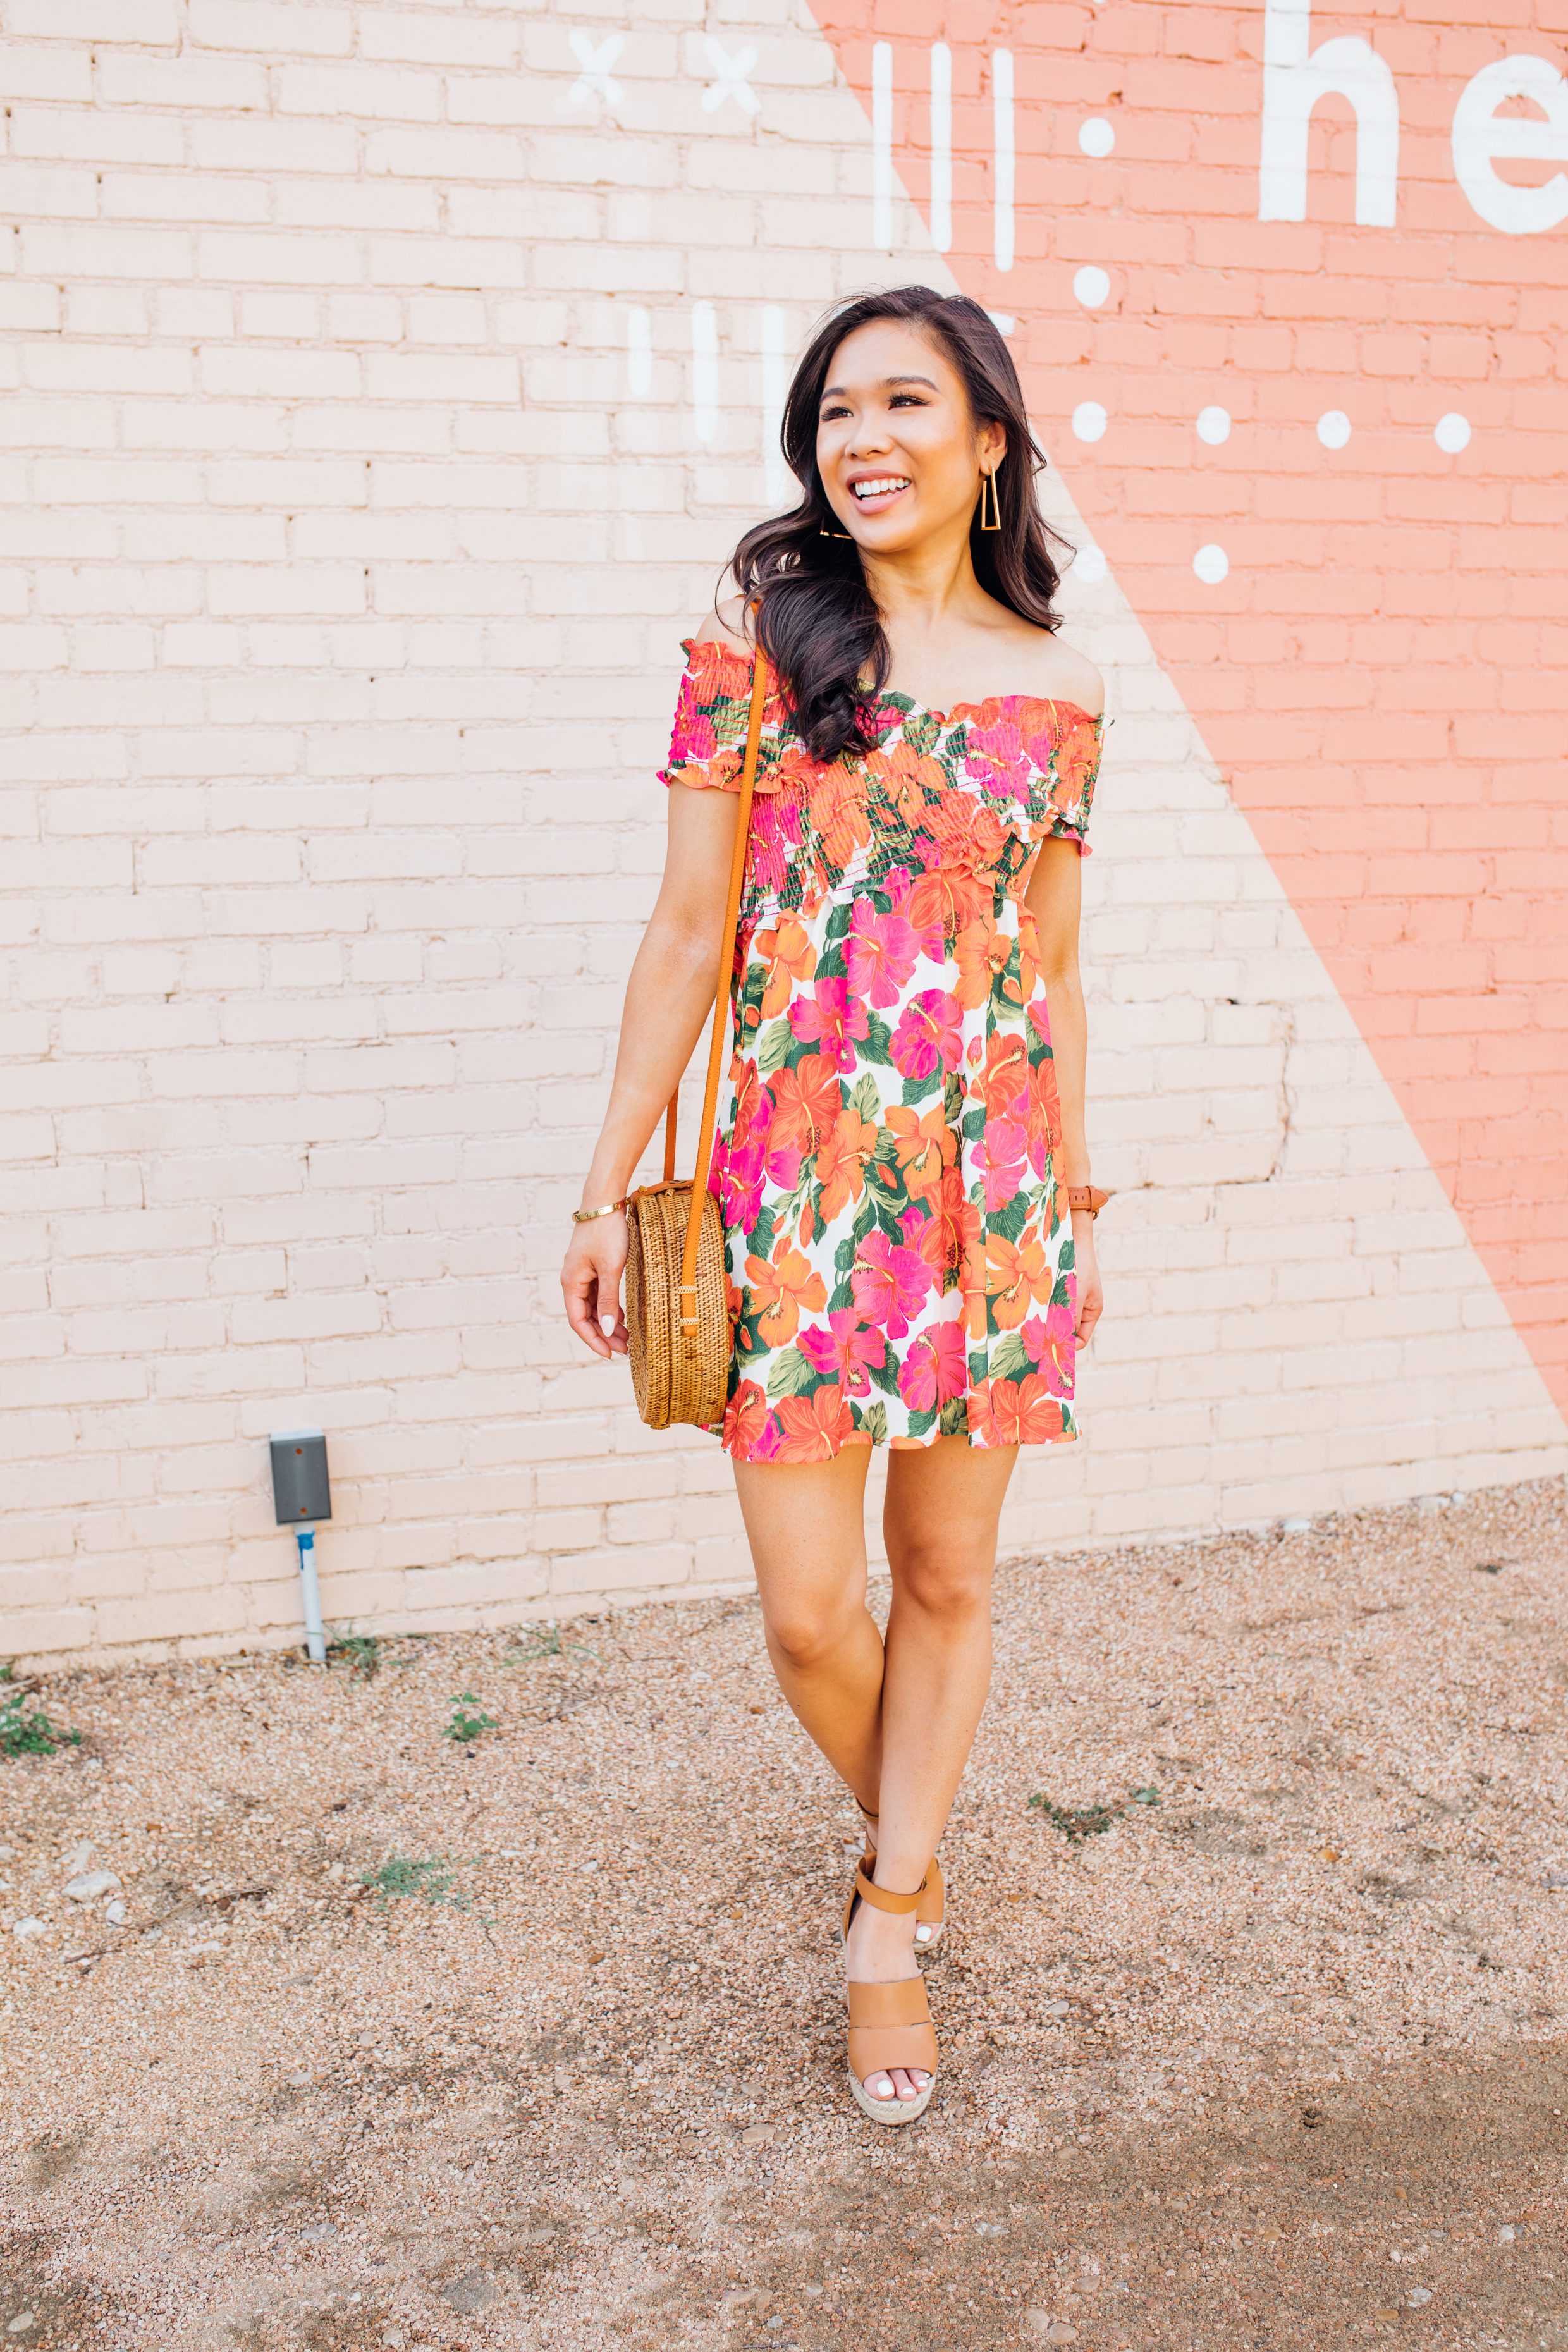 Blogger Hoang-Kim wears Kendra Scott Easton earrings with a tropical floral dress